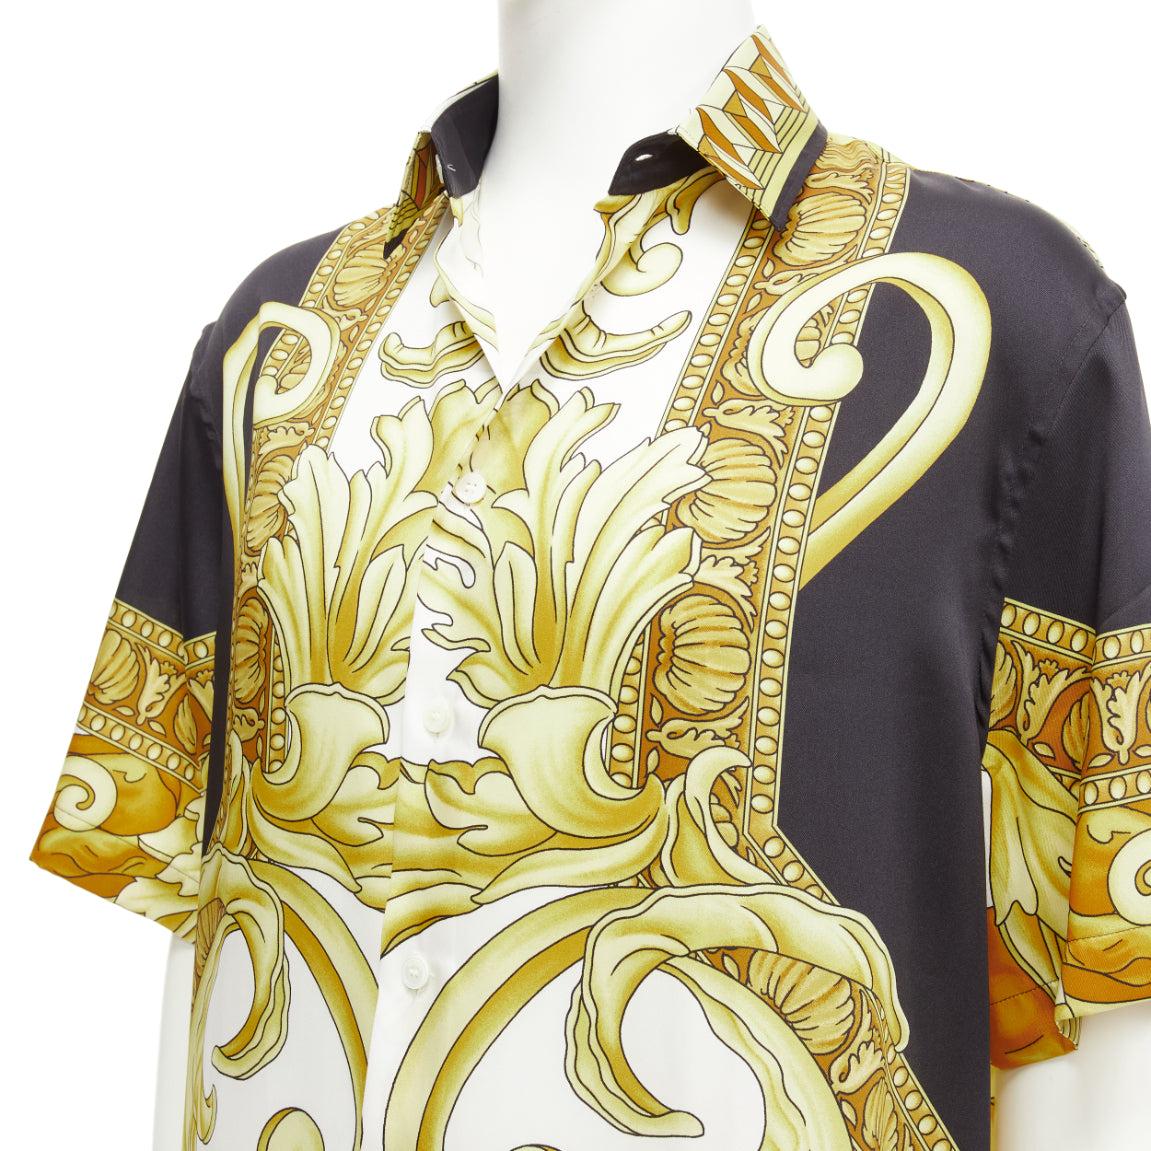 VERSACE Renaissance Barocco gold black white casual shirt IT52 XL
Reference: TGAS/D01066
Brand: Versace
Collection: 2023
Material: Polyester
Color: Gold, Black
Pattern: Barocco
Closure: Button
Made in: Romania

CONDITION:
Condition: Unworn in mint